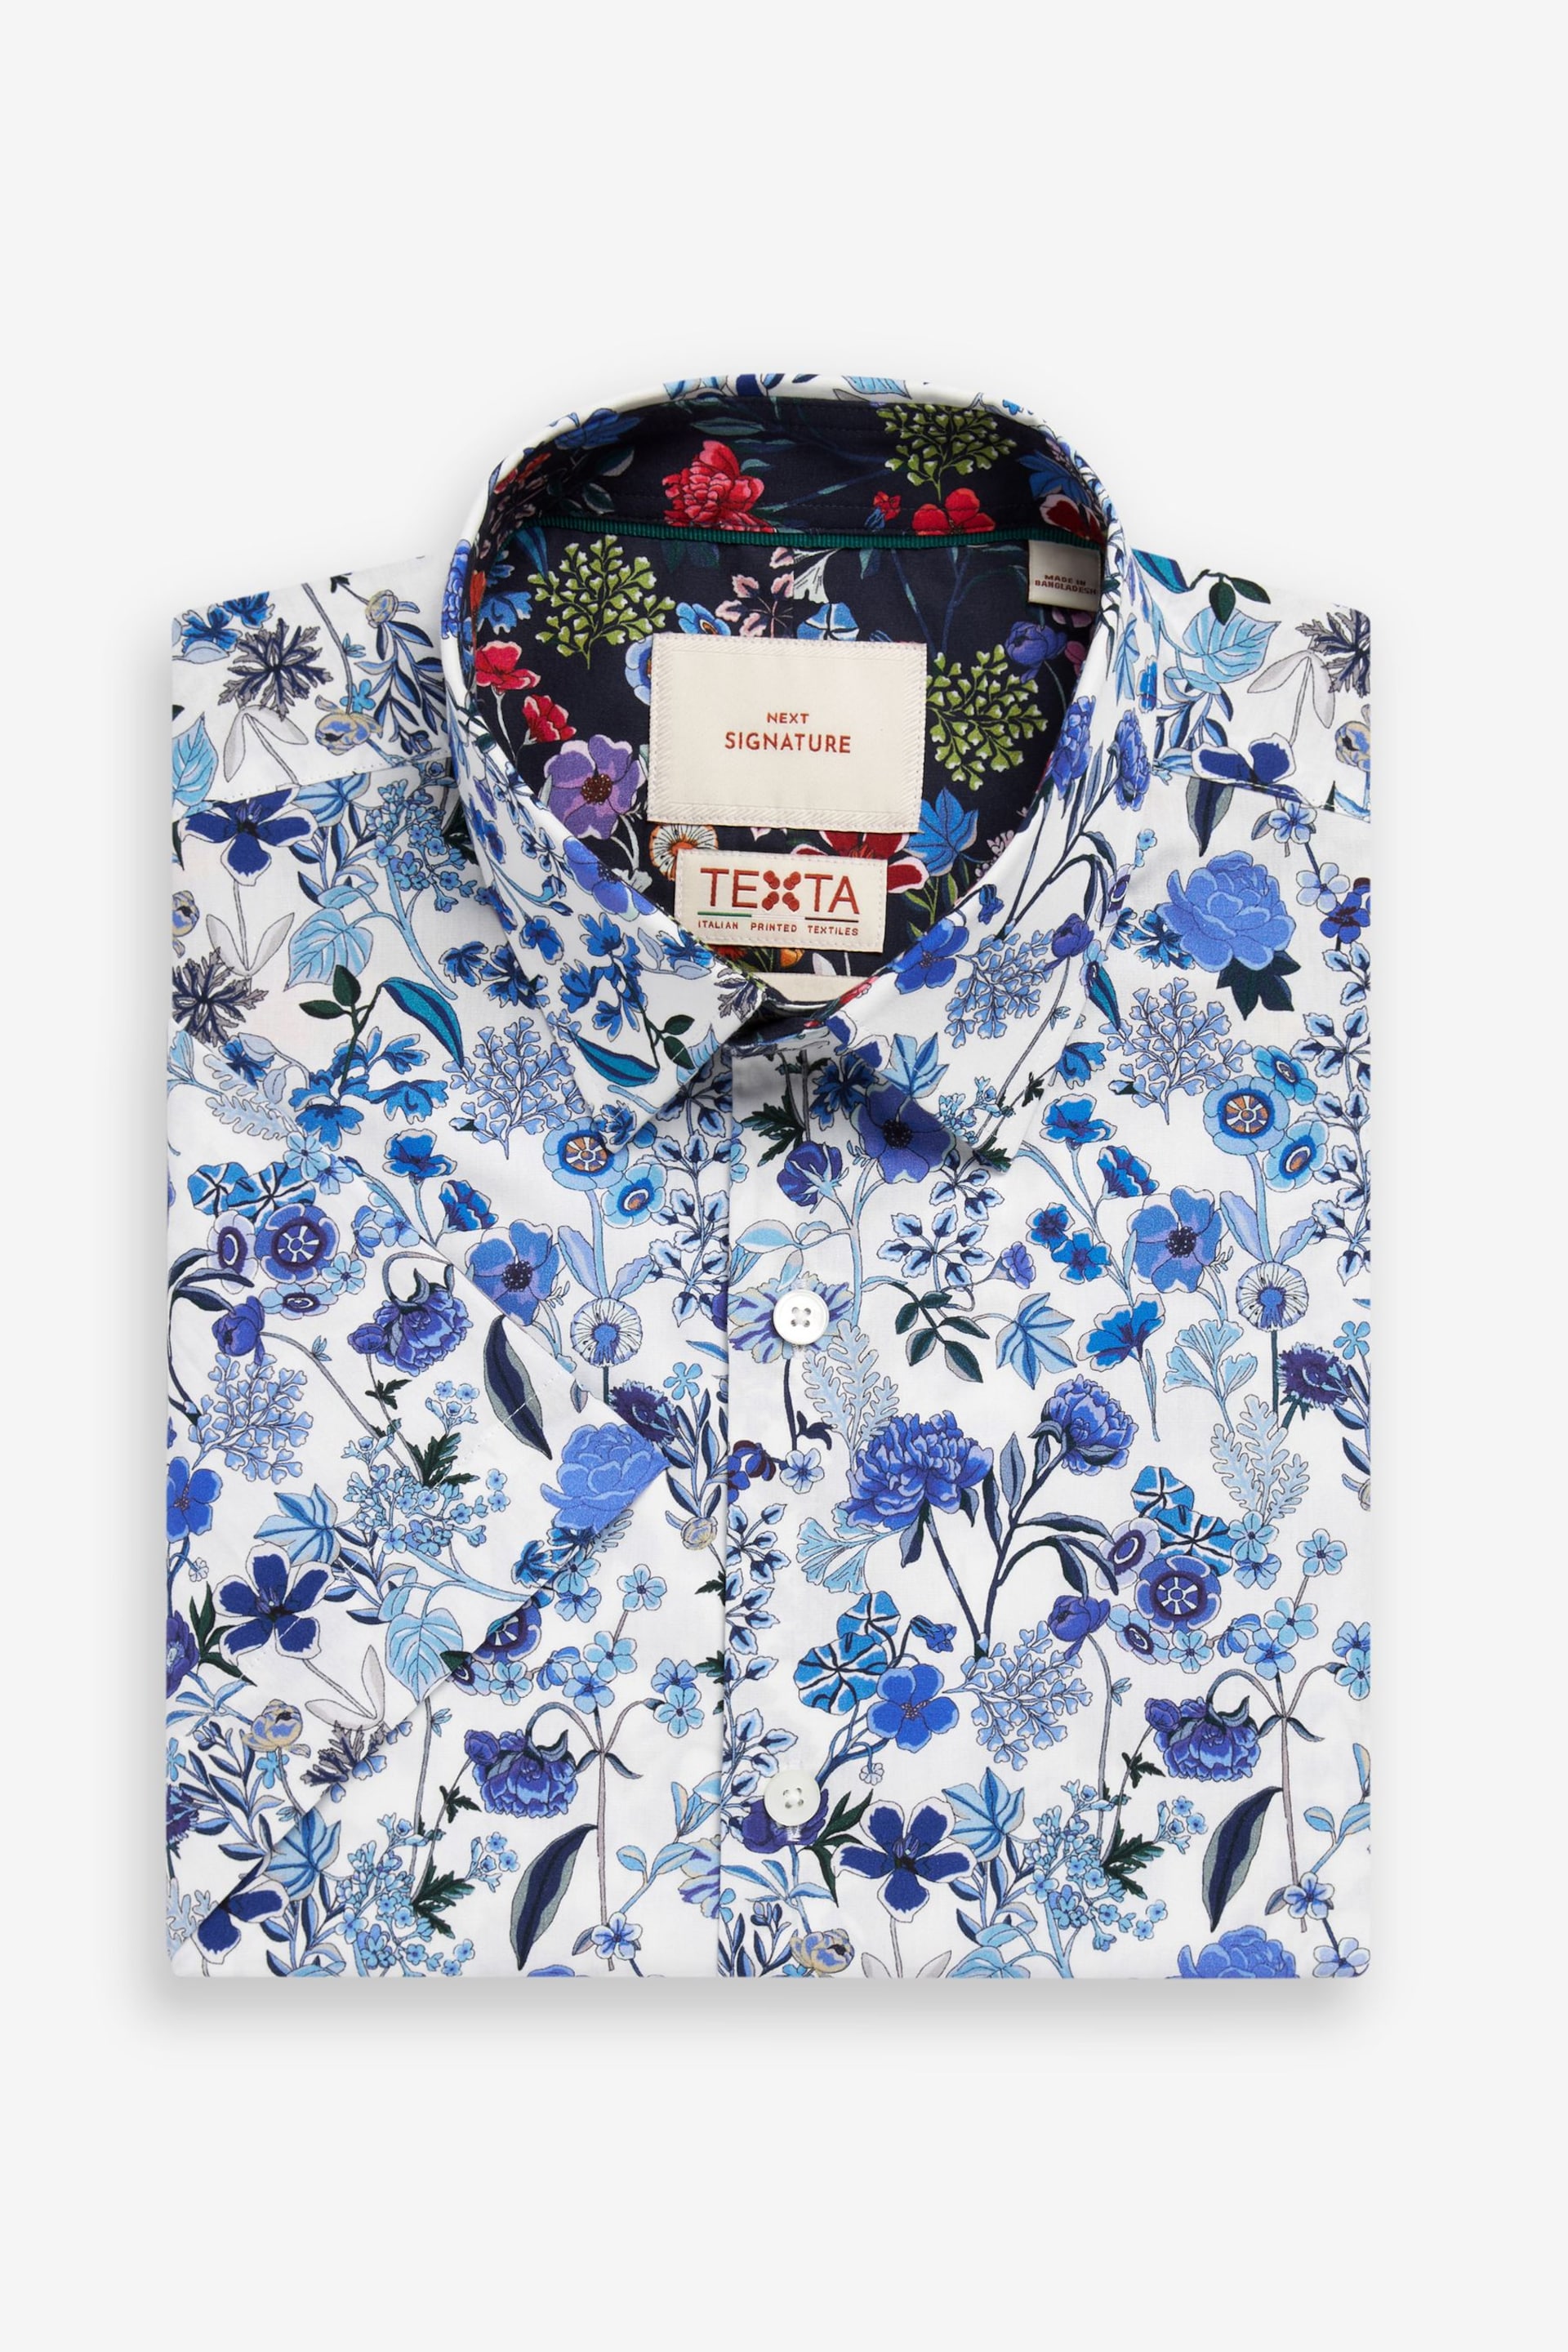 White/Blue Floral Signature Made With Italian Fabric Printed Short Sleeve Shirt - Image 5 of 7